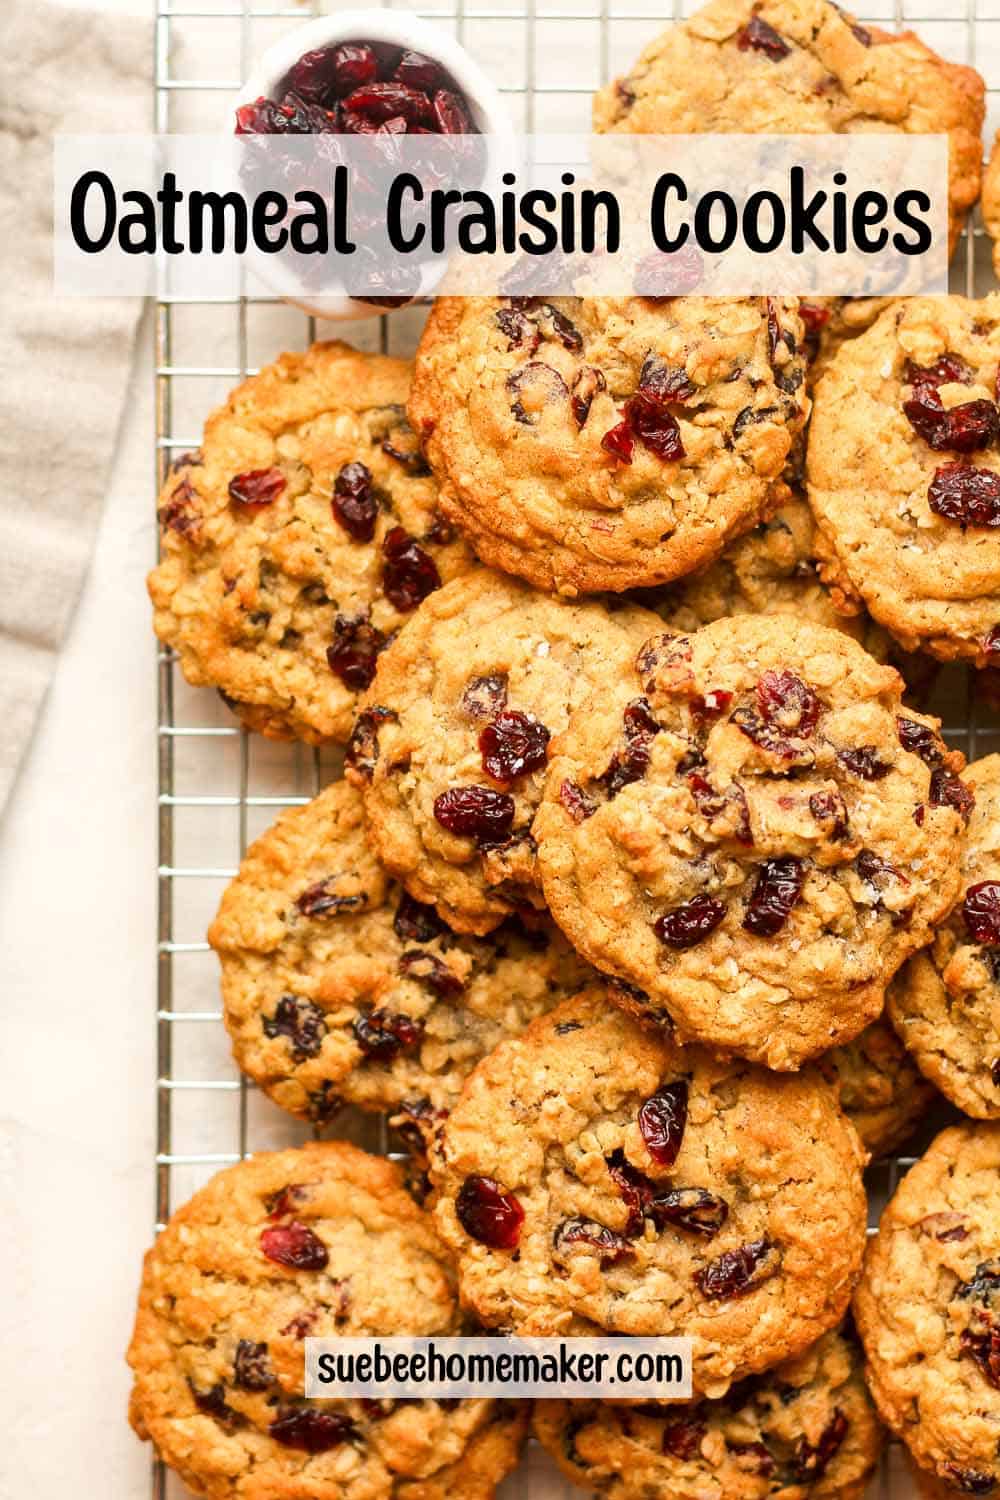 A rack of stacked oatmeal Craisin cookies.